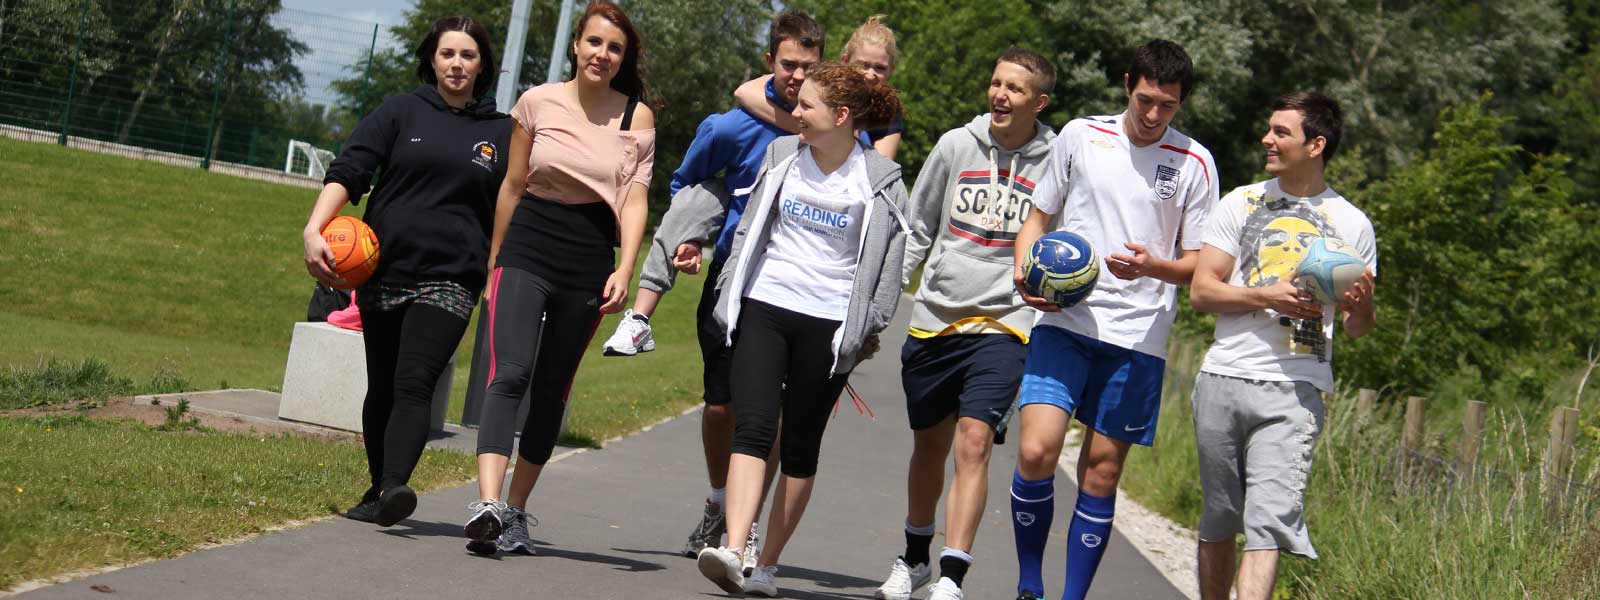 Furness students walking towards camera with some balls by the sports pitches